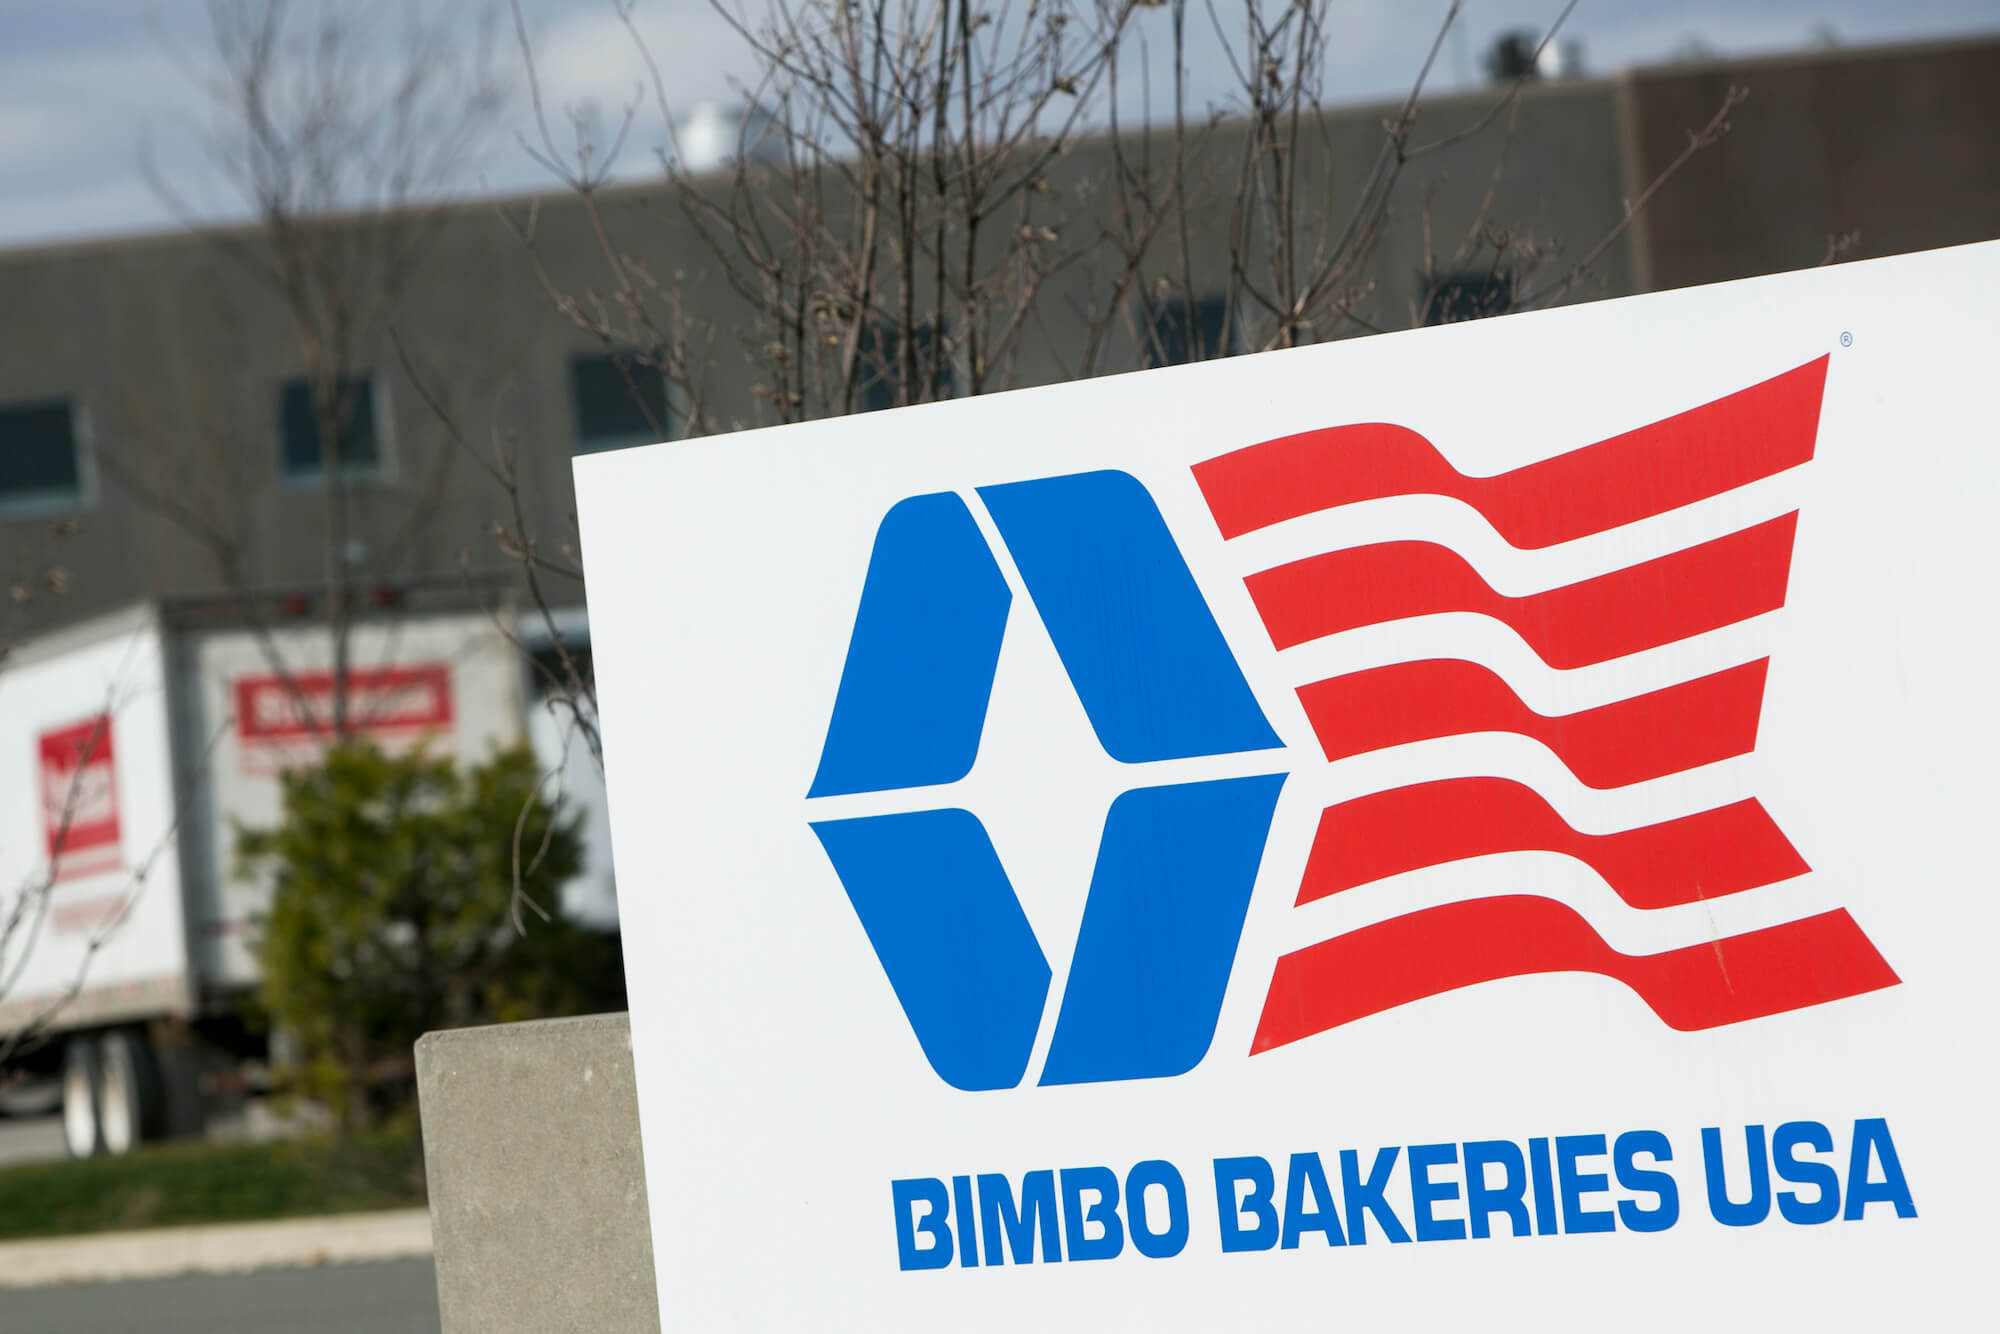 A logo sign outside of a facility occupied by Bimbo Bakeries USA in Breinigsville, Pennsylvania. December 2020